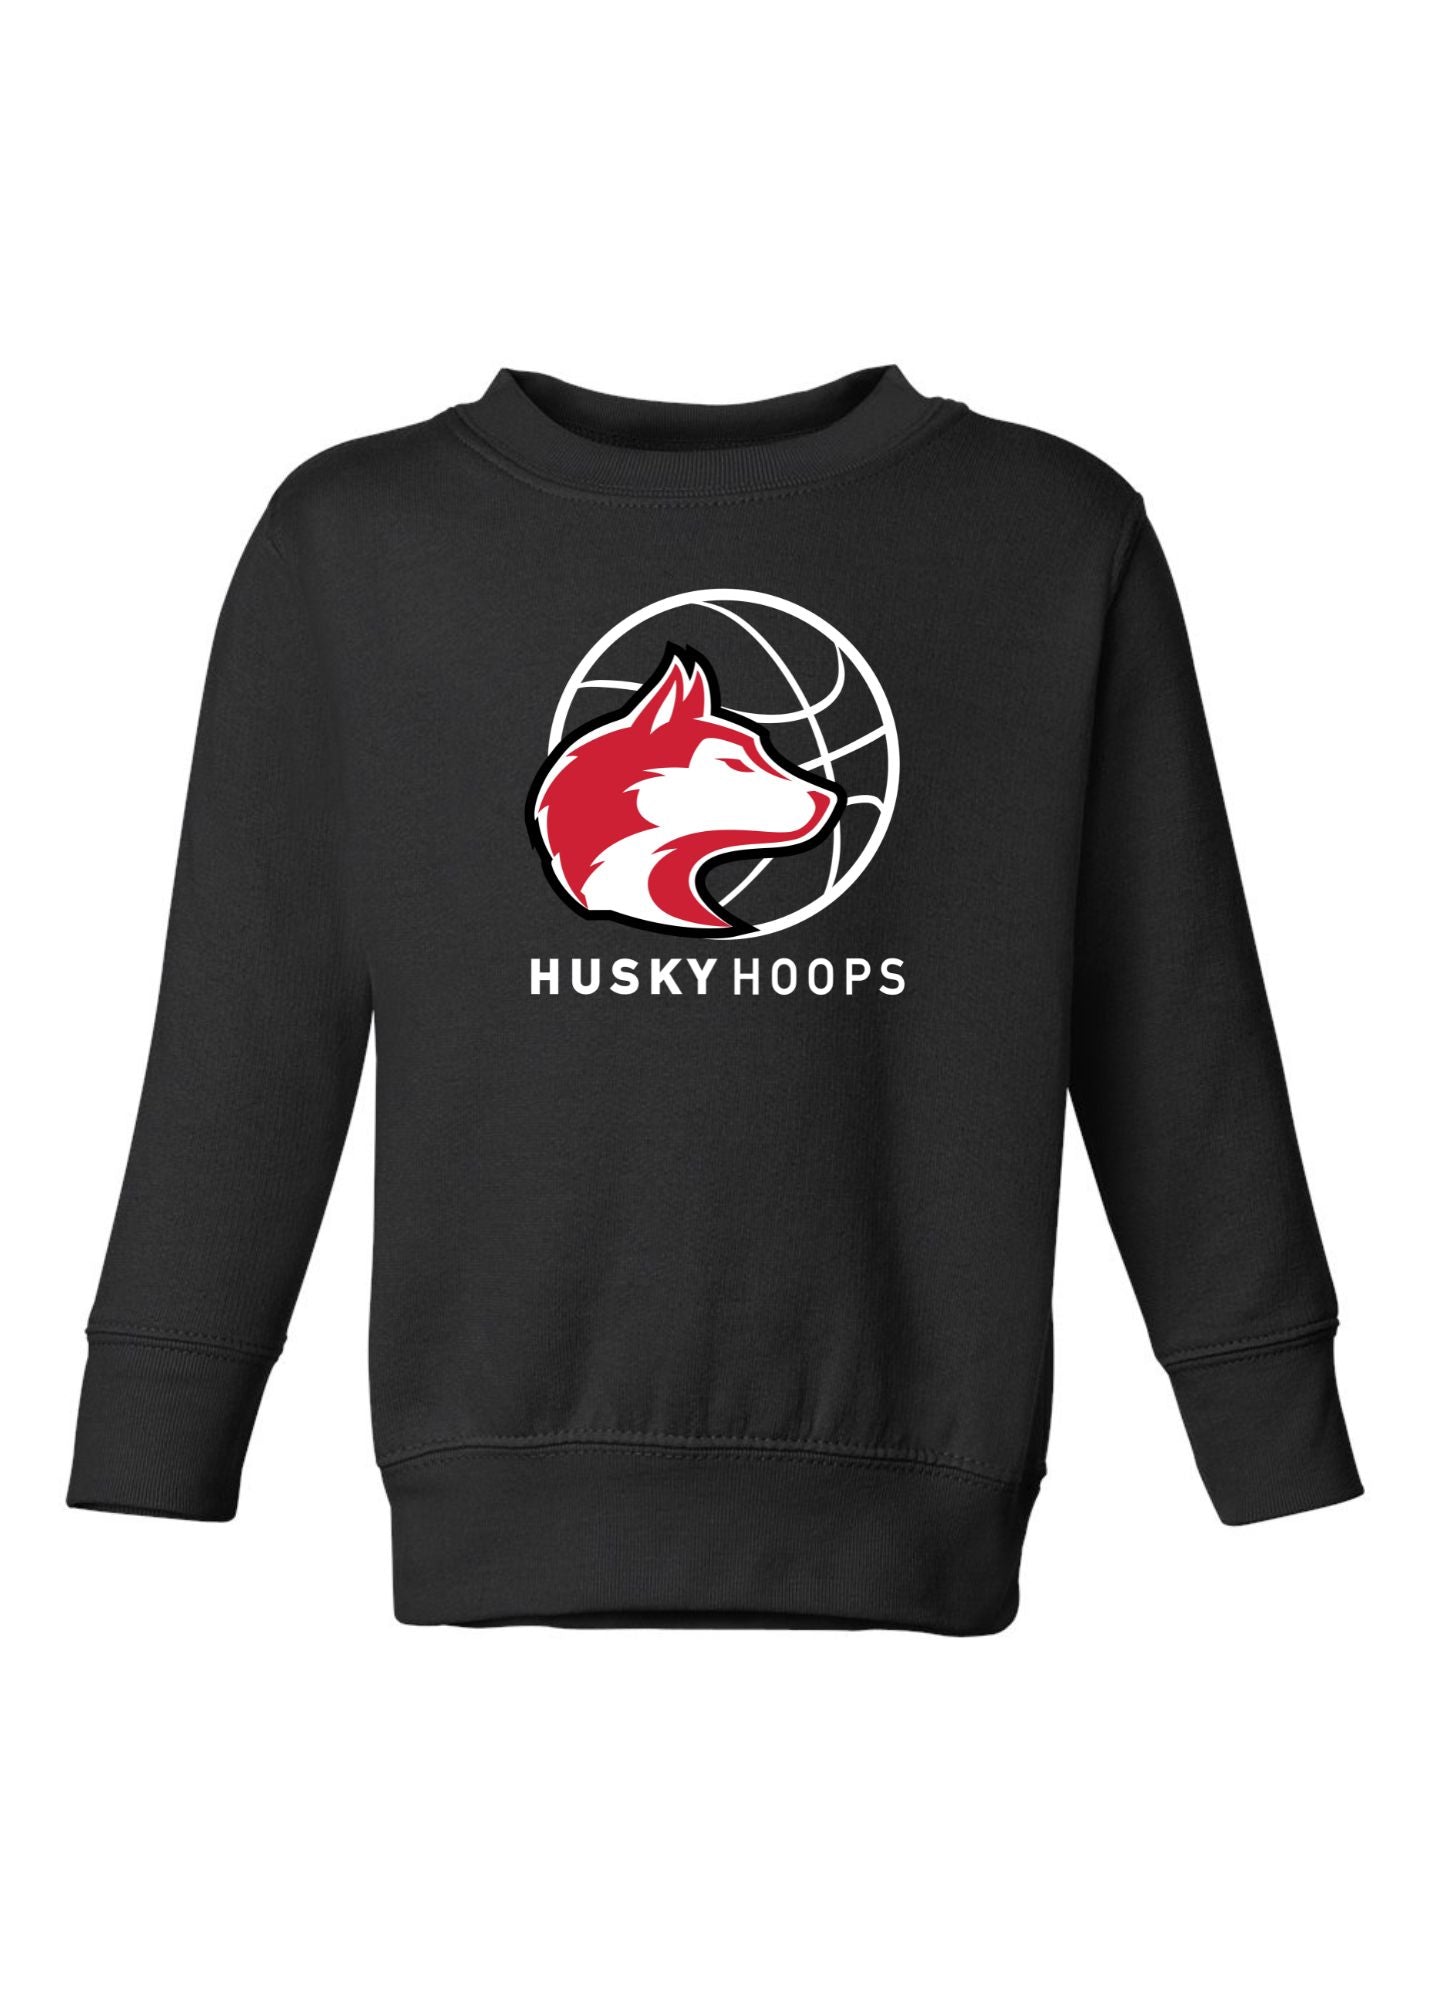 Husky Hoops | Adult Pullover-Adult Crewneck-Sister Shirts-Sister Shirts, Cute & Custom Tees for Mama & Littles in Trussville, Alabama.